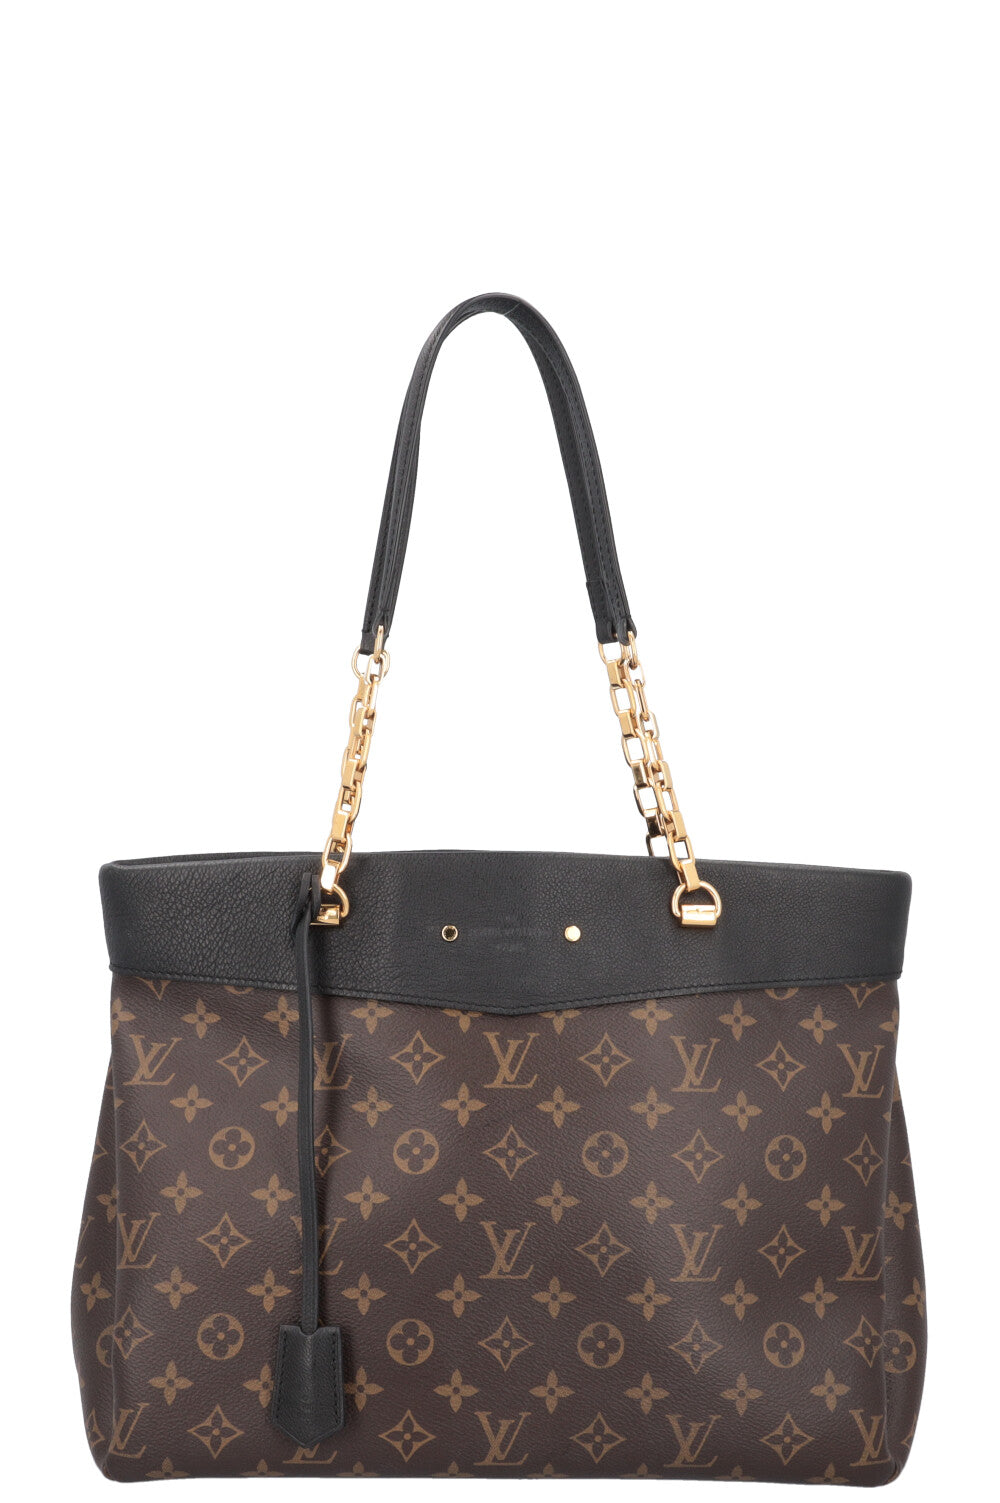 LOUIS VUITTON Pallas Chain Tote Bag MNG Canvas Leather$